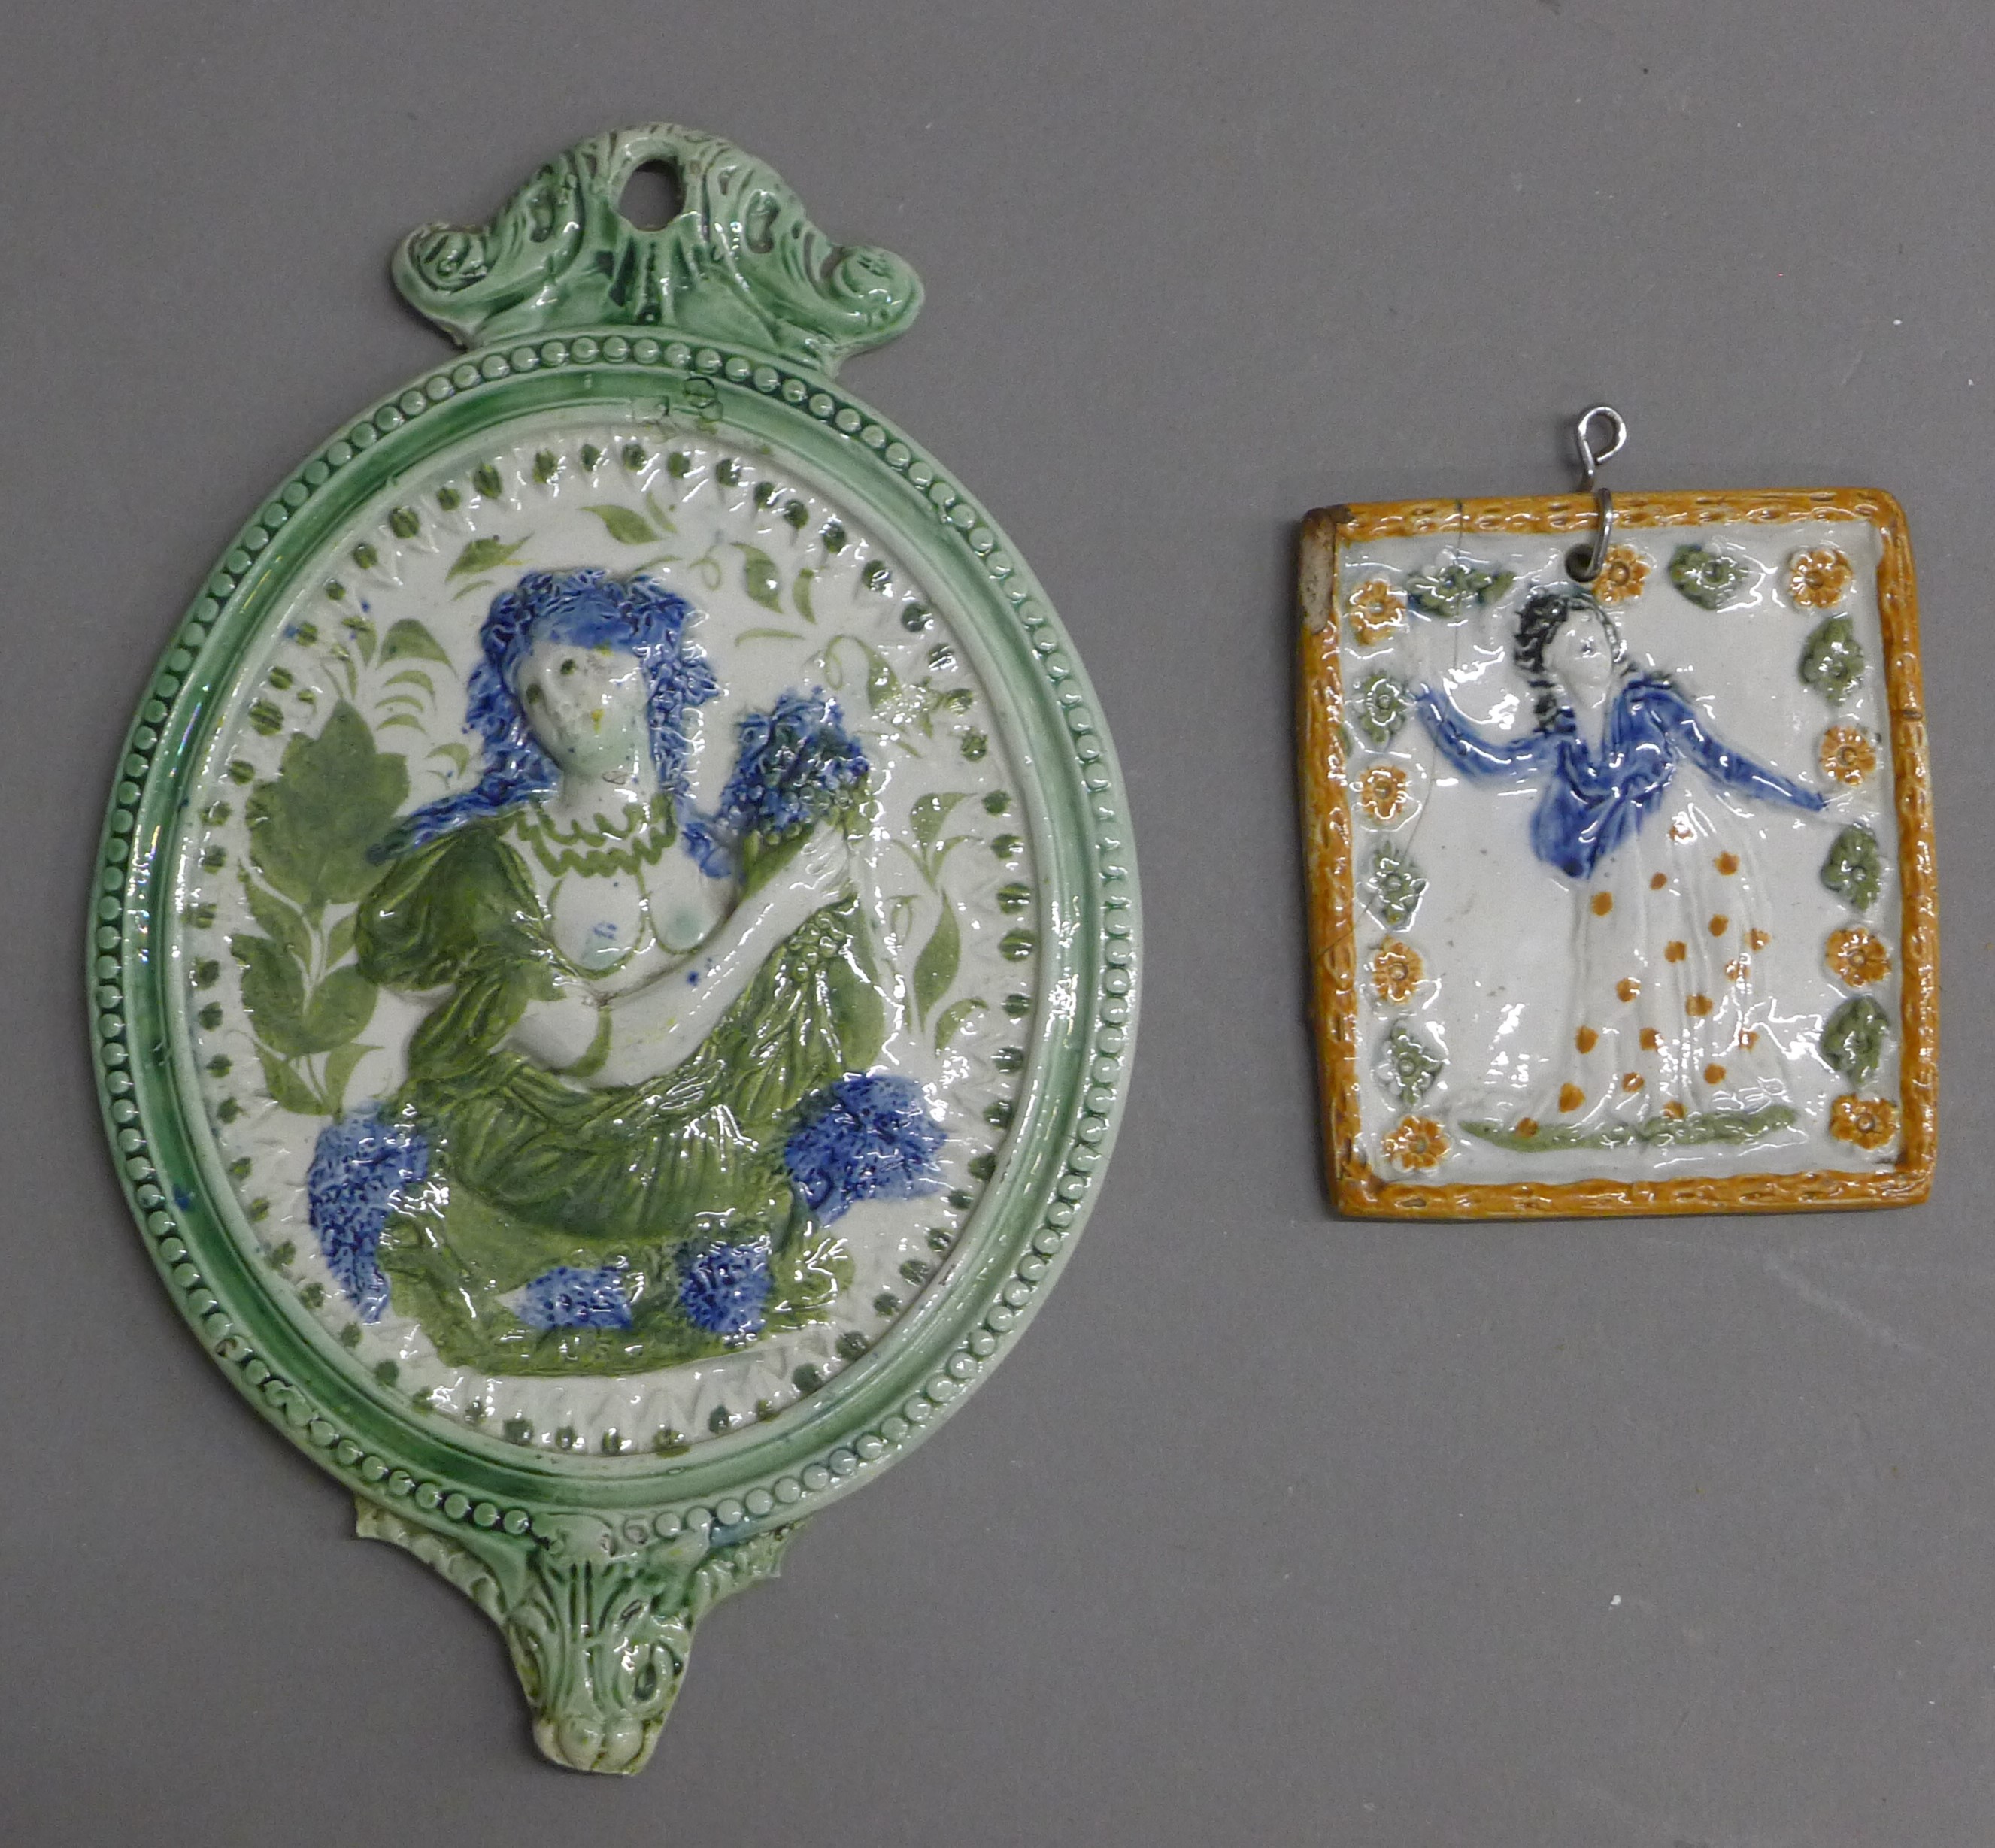 Two 19th century Prattware plaques. The largest 19.5 cm high.